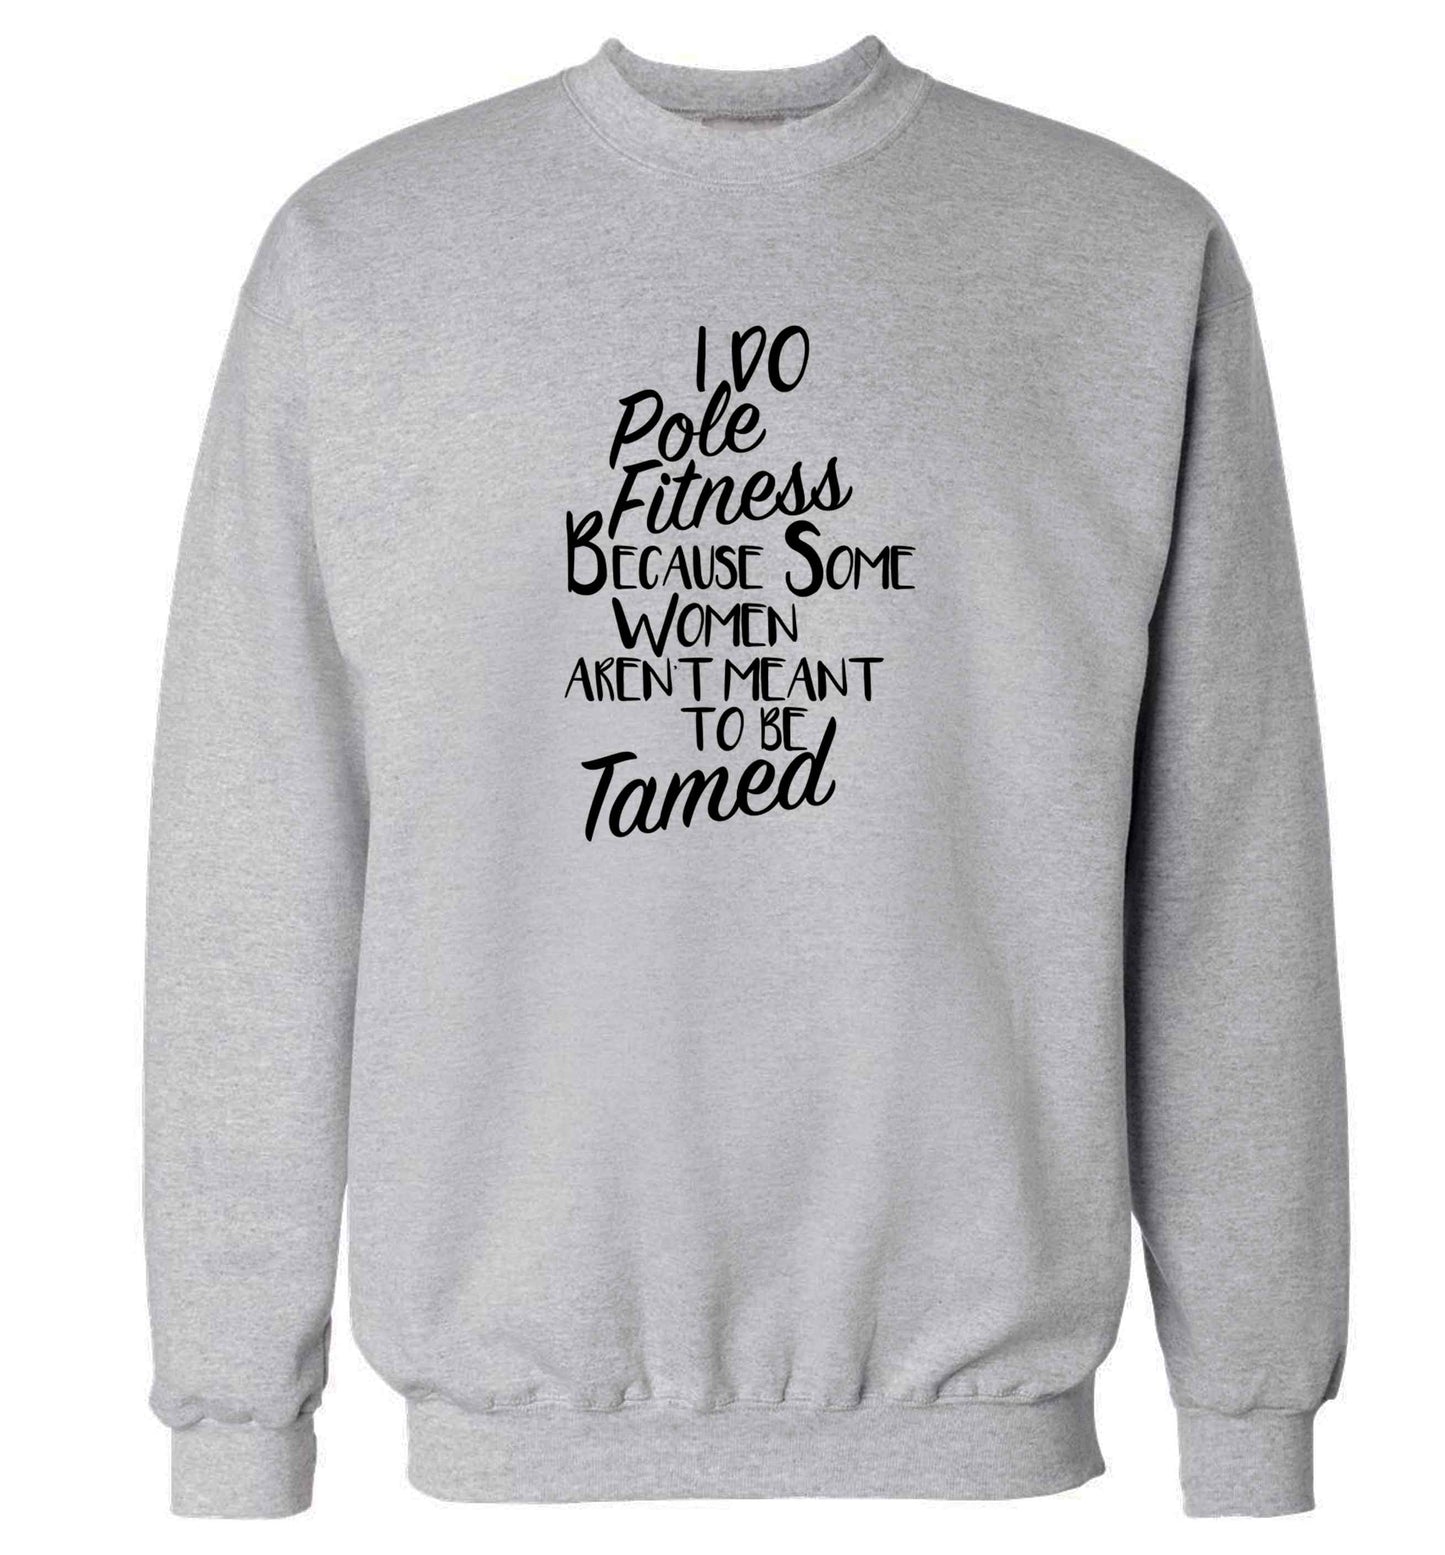 I do pole fitness because some women aren't meant to be tamed adult's unisex grey sweater 2XL